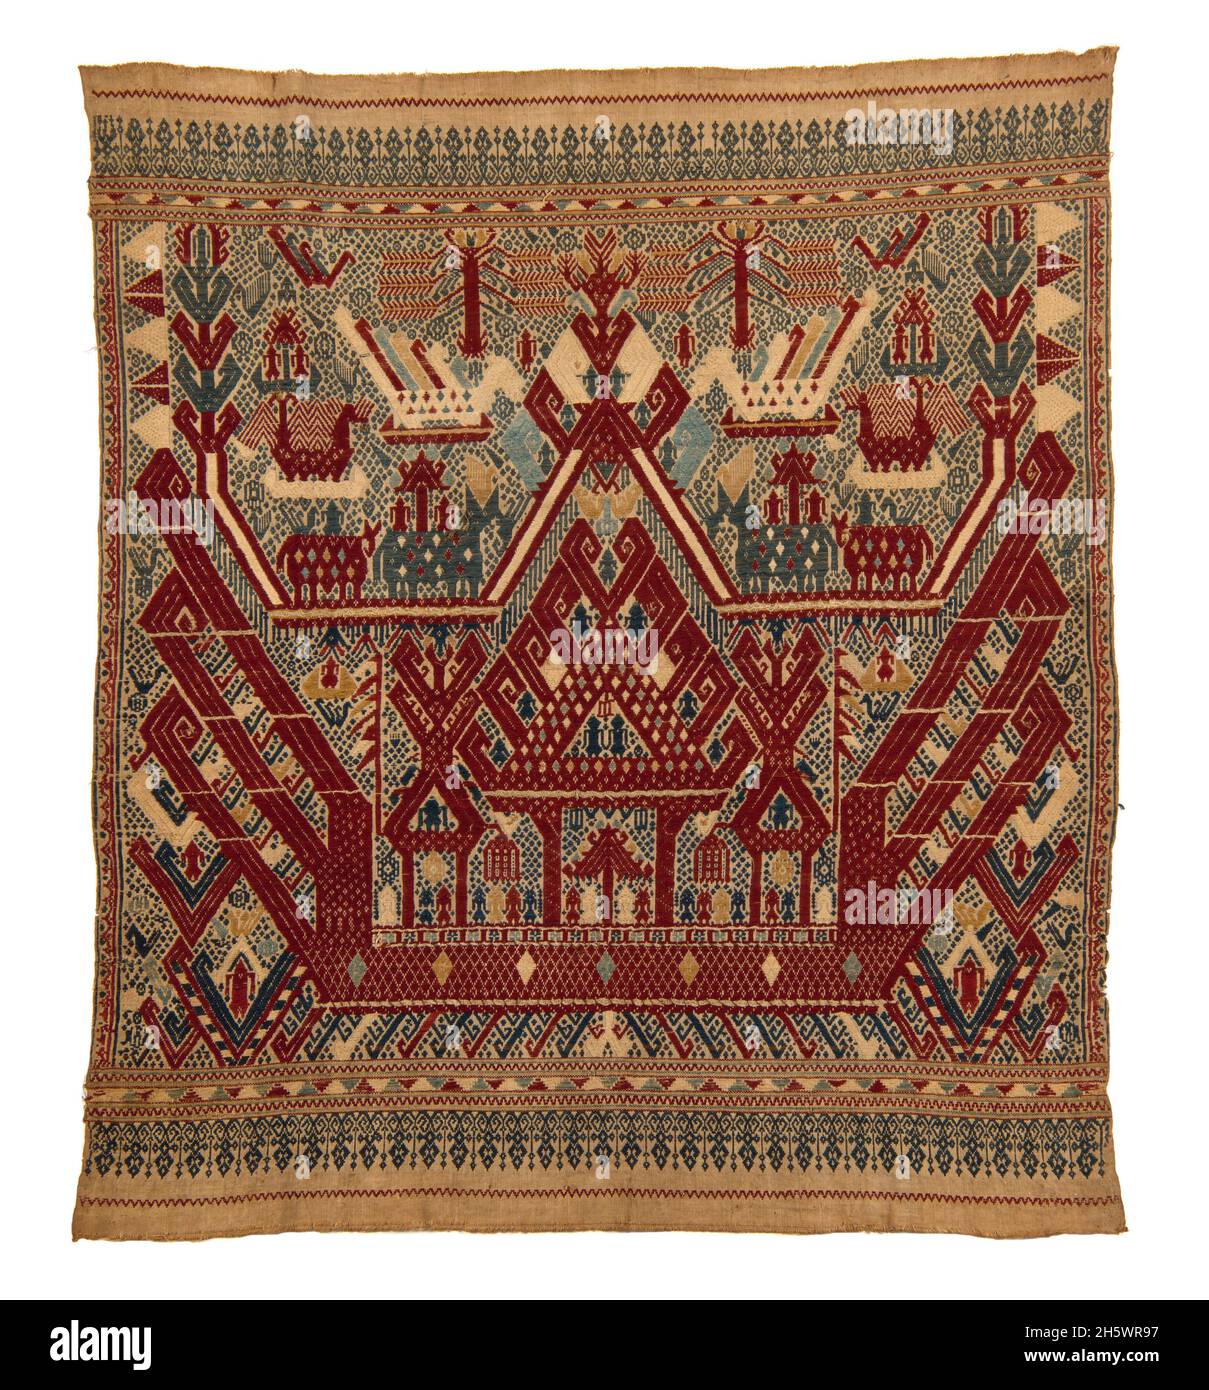 Textile, C19th, Lampung, Sumatra. Tampan were used for rites of passage ceremonies, as the focal point for ritual meals, the seat for elders overseeing traditional law, and tied to newly-built houses. Those woven in blue depict the secular realm, those in red the sacred. Examples from the mountainous interior show stylised natural or domestic subjects and geometric designs, while those from the coast (tampan pasisir) display richly detailed scenes of ships and other motifs. The ship, the main motif, symbolises movement, appropriate to the rites of passage rituals. Stock Photo